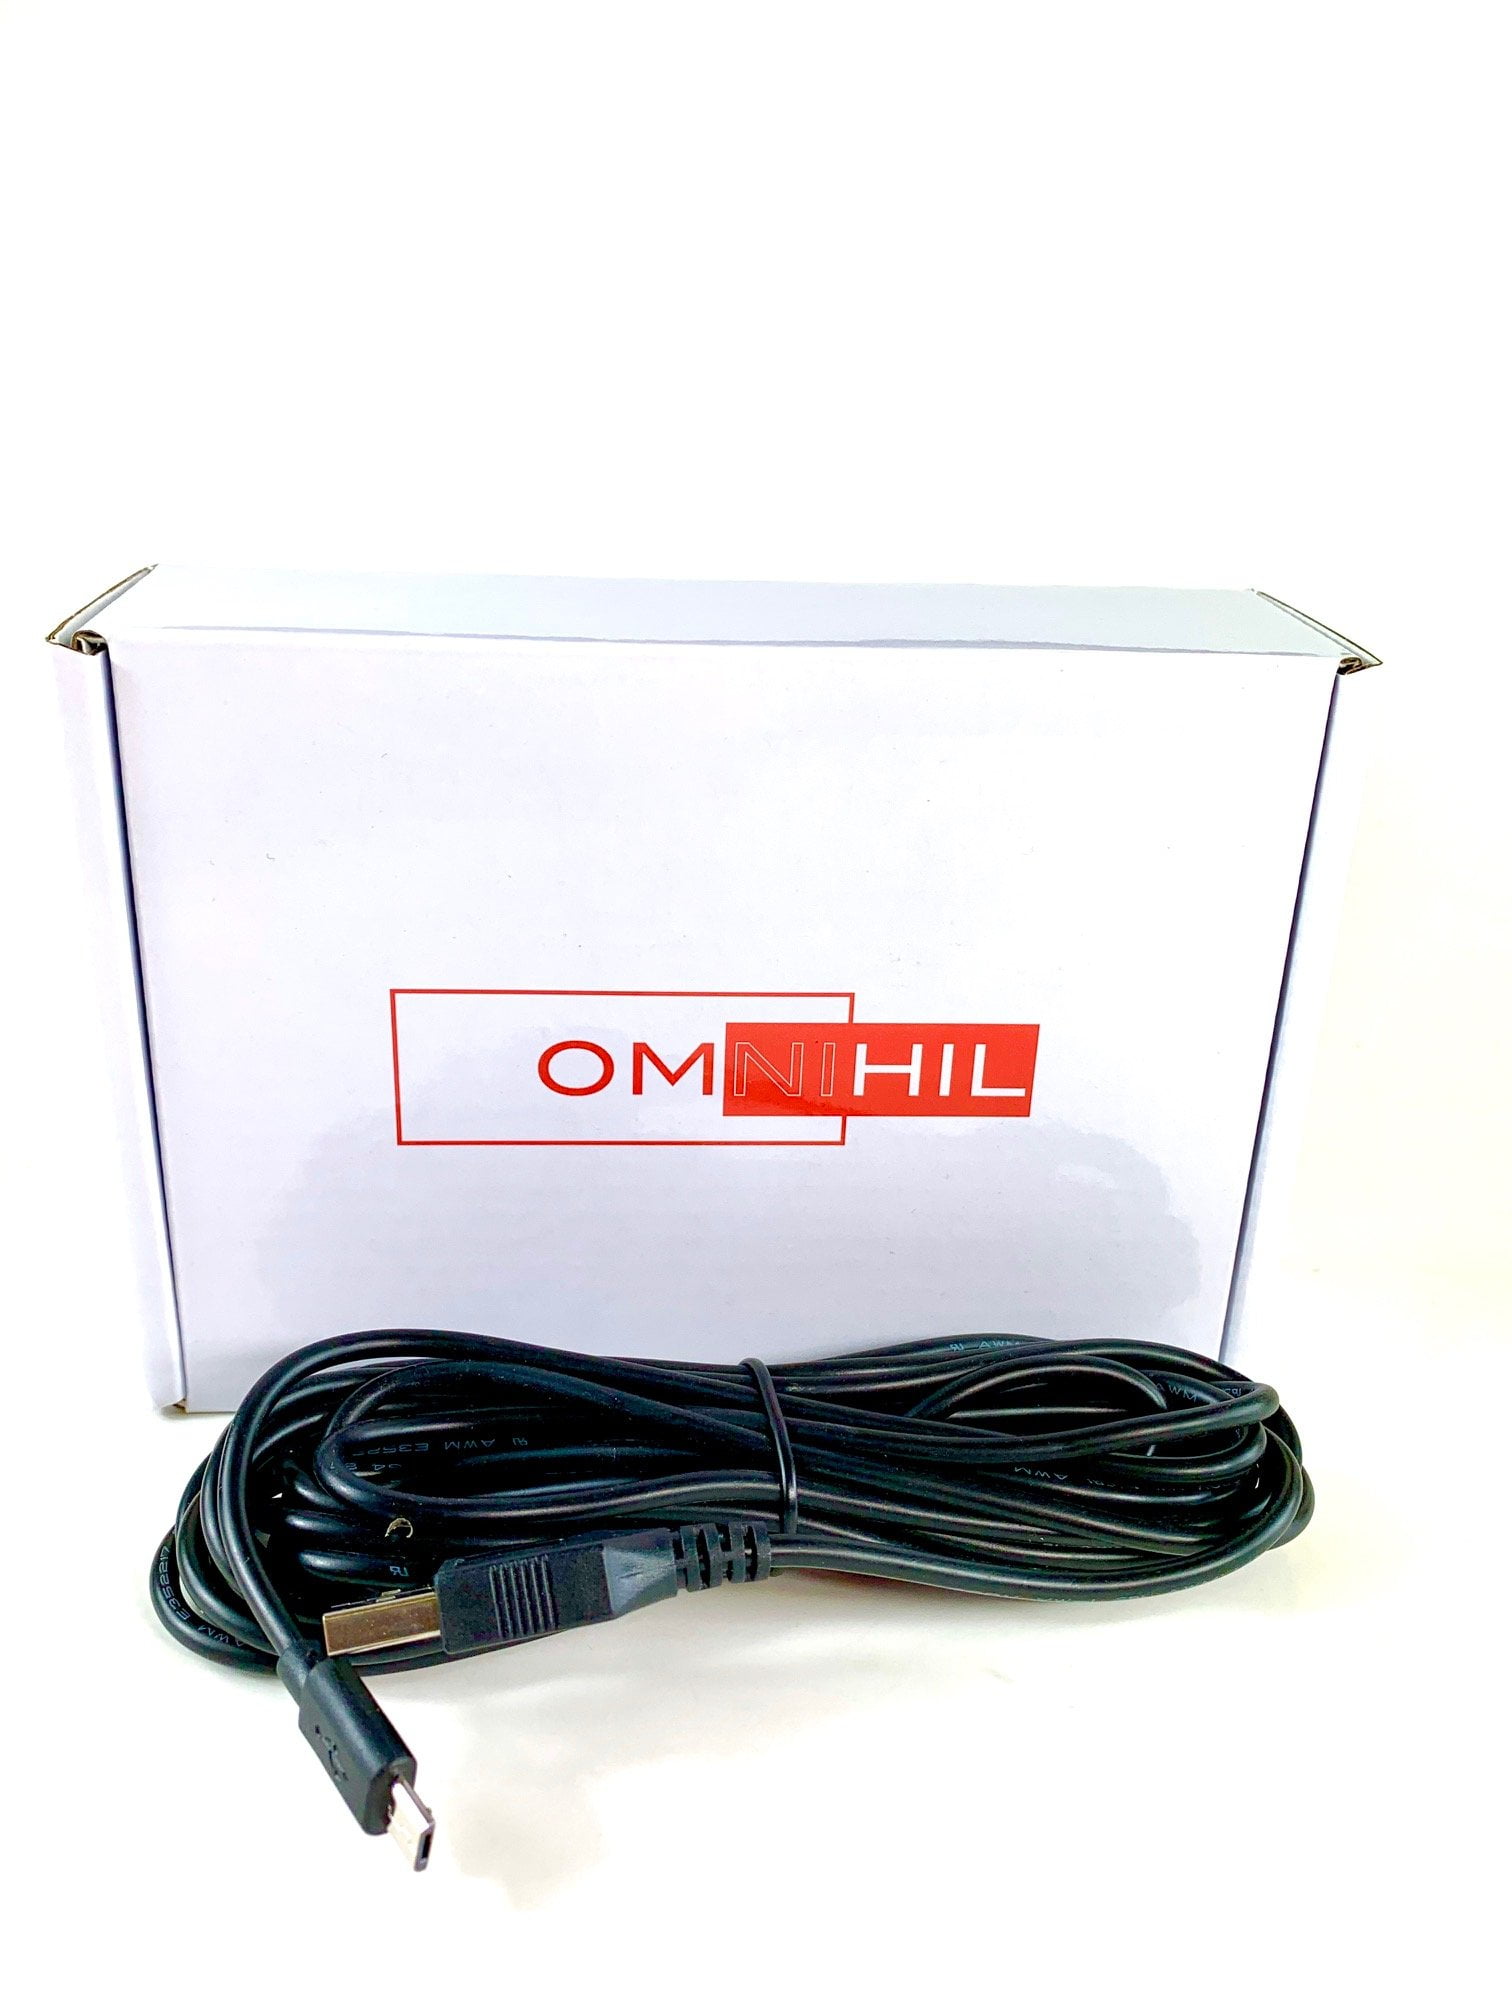 OMNIHIL 15FT Long High Speed USB 2.0 Cable Compatible with BENQ MX660P DLP Projector 